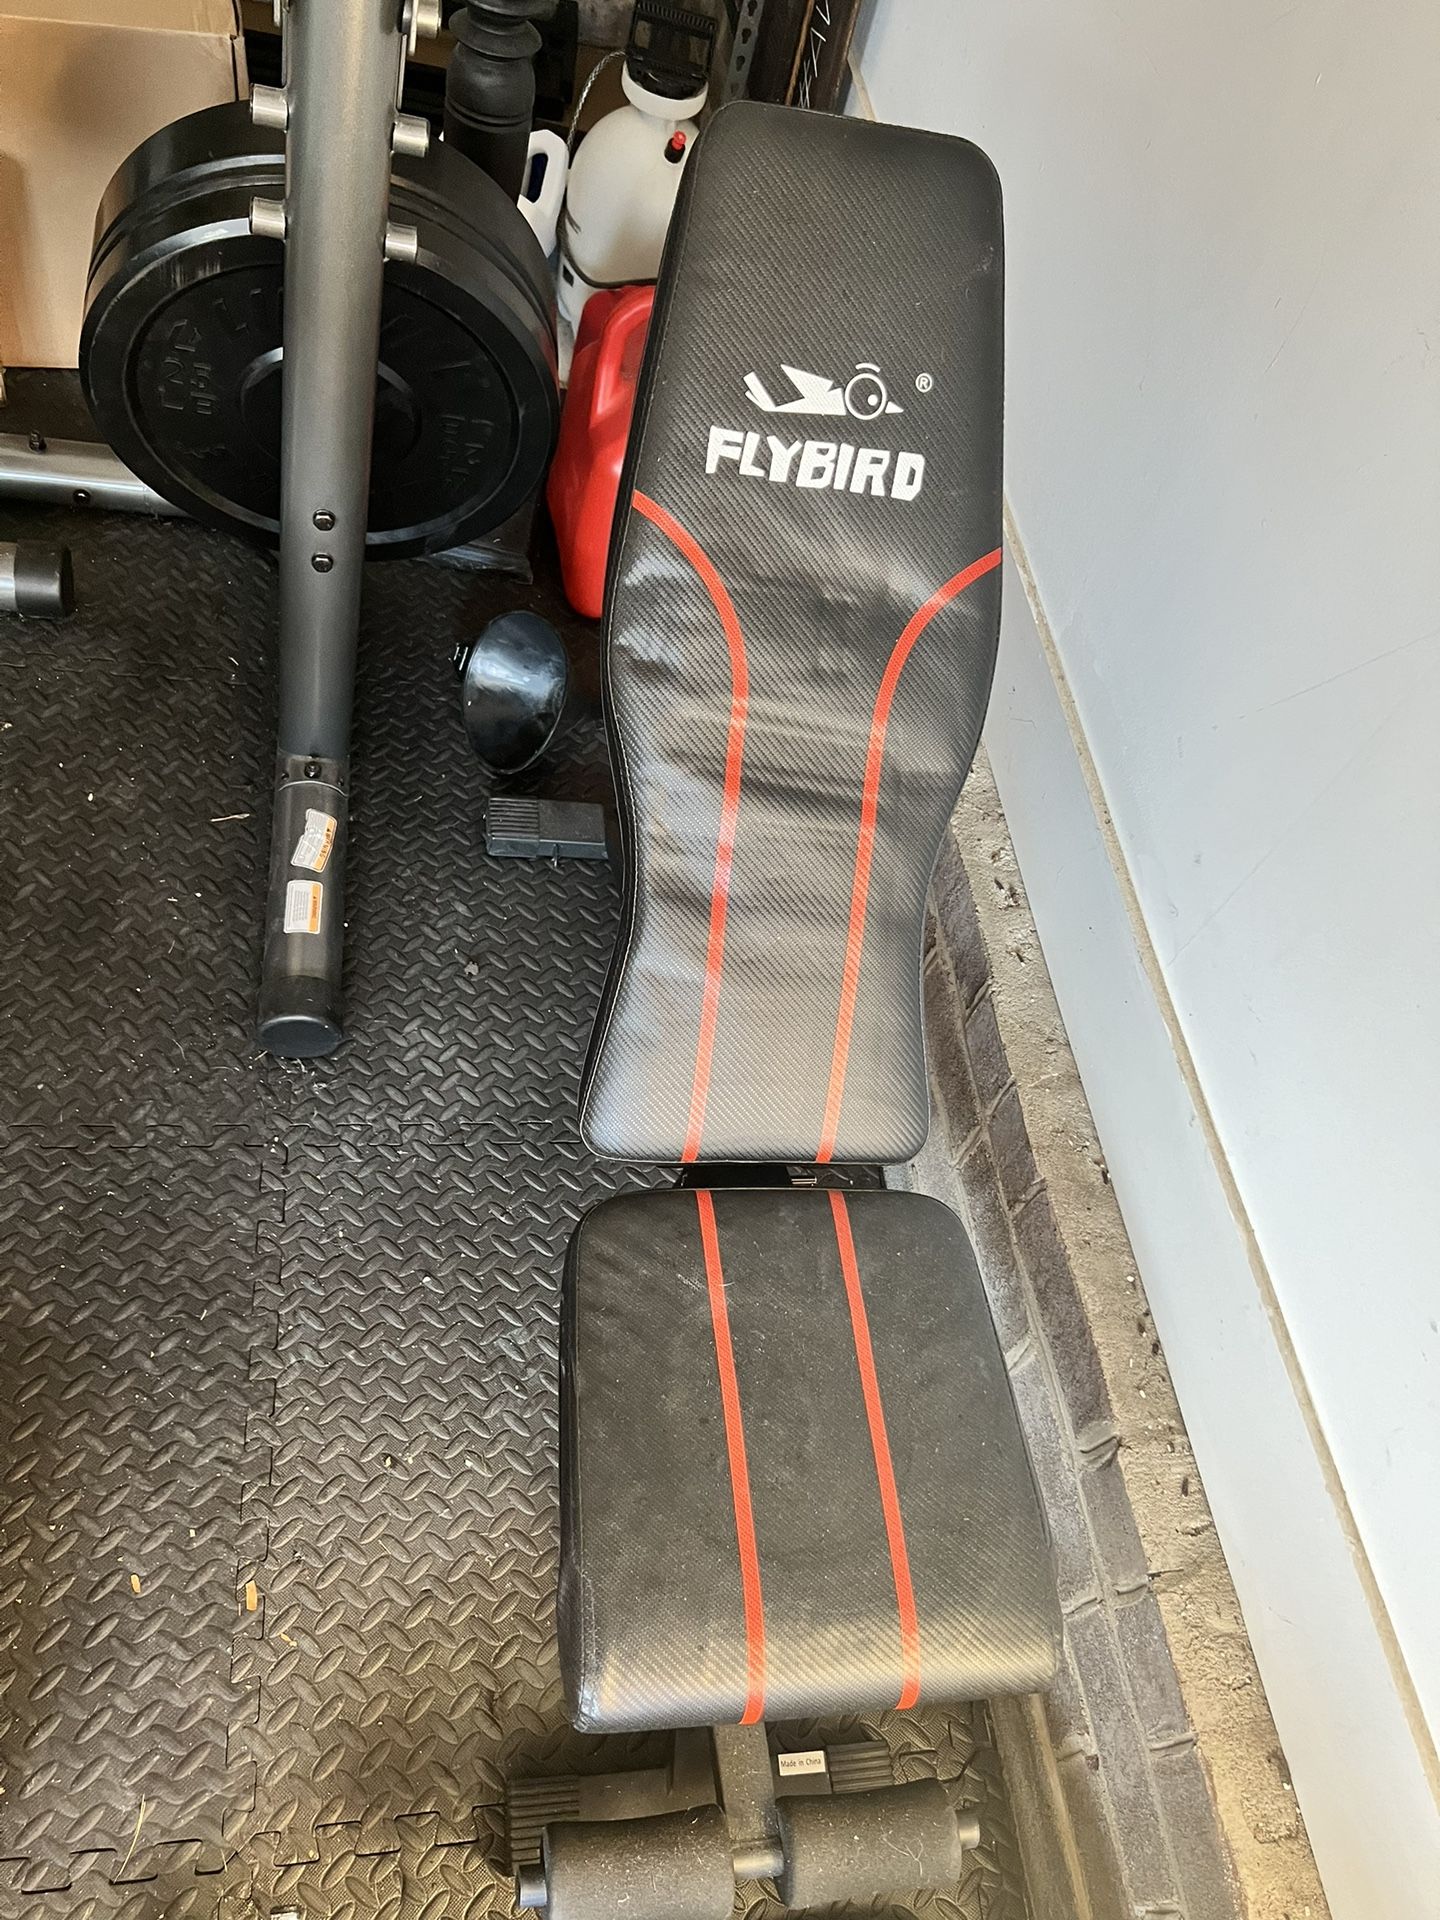 FLYBIRD Workout Bench